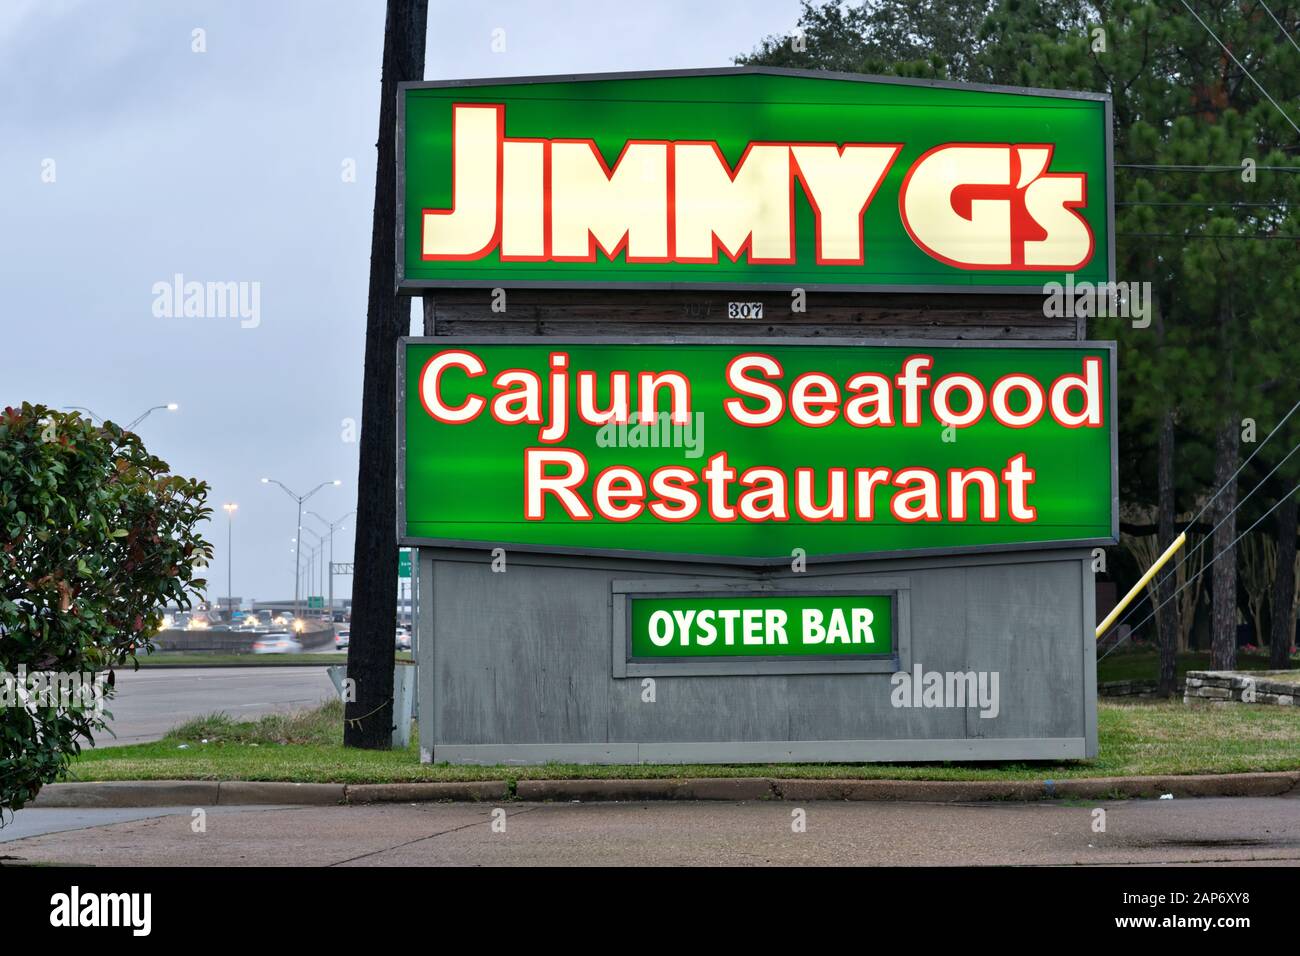 Houston, Texas/USA 01/15/2020: Jimmy G's Cajun Seafood Restaurant neon road sign by Beltway 8 in North Houston, TX. Established in 2012. Stock Photo